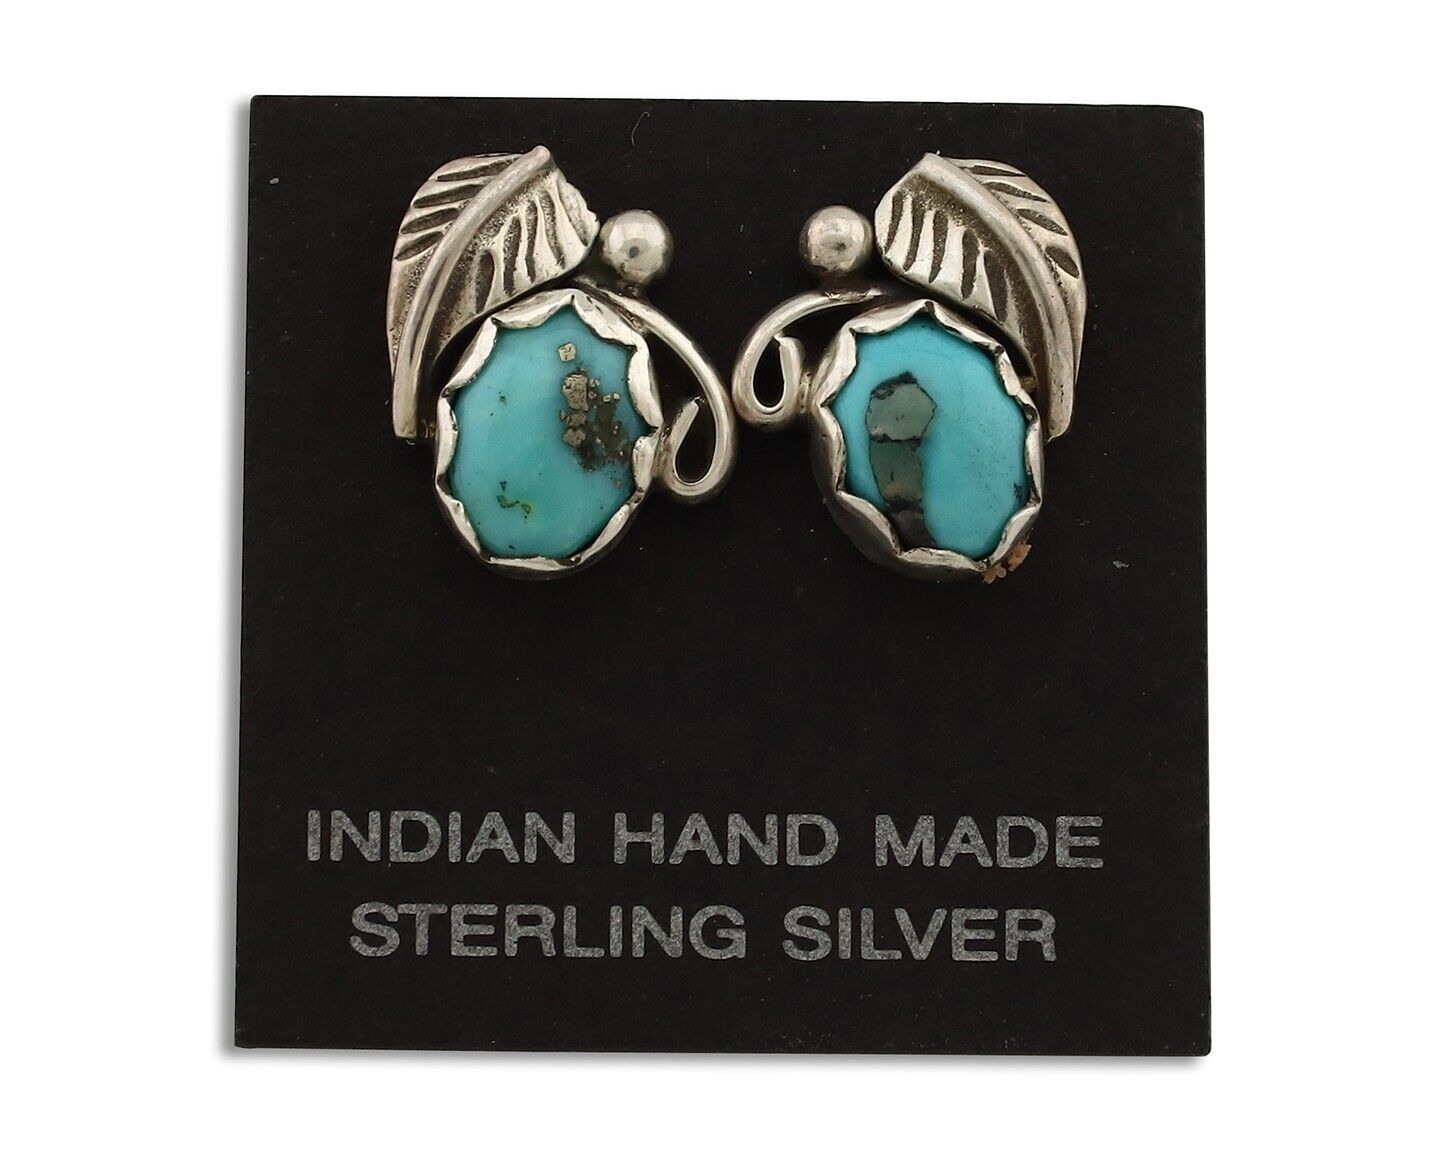 Navajo Earrings 925 Silver Natural Mined Turquoise Native American Artist C.80's